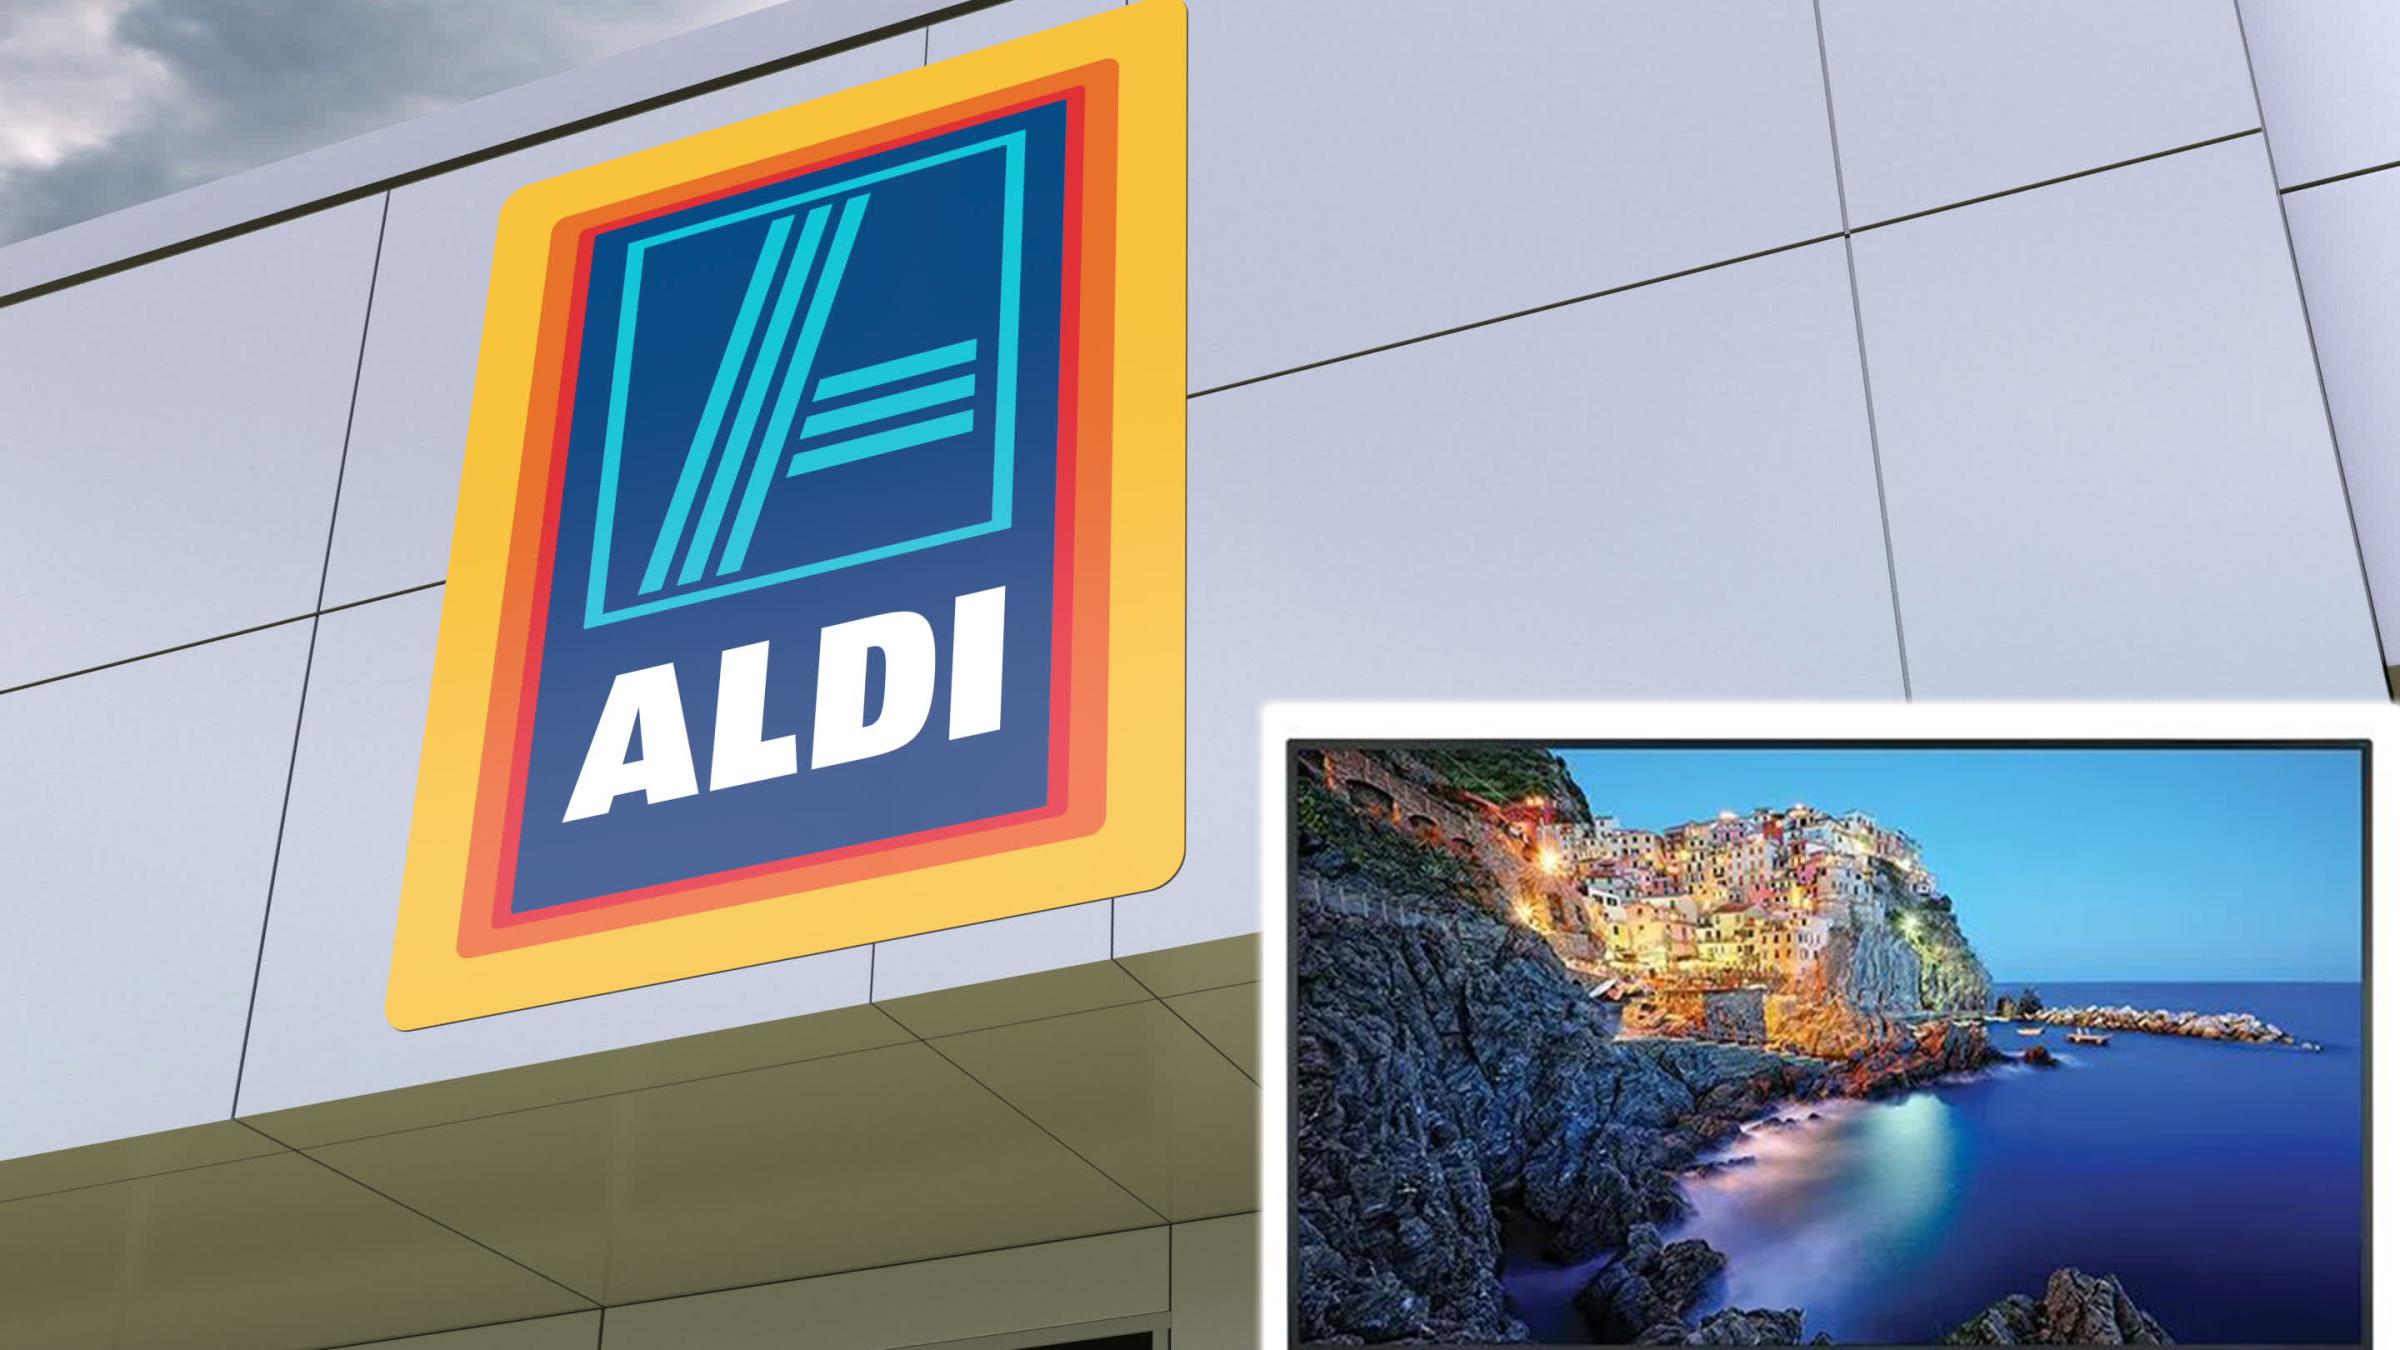 Super Cheap 65 Inch Ultra HD TV Returns To ALDI’s Special Buys